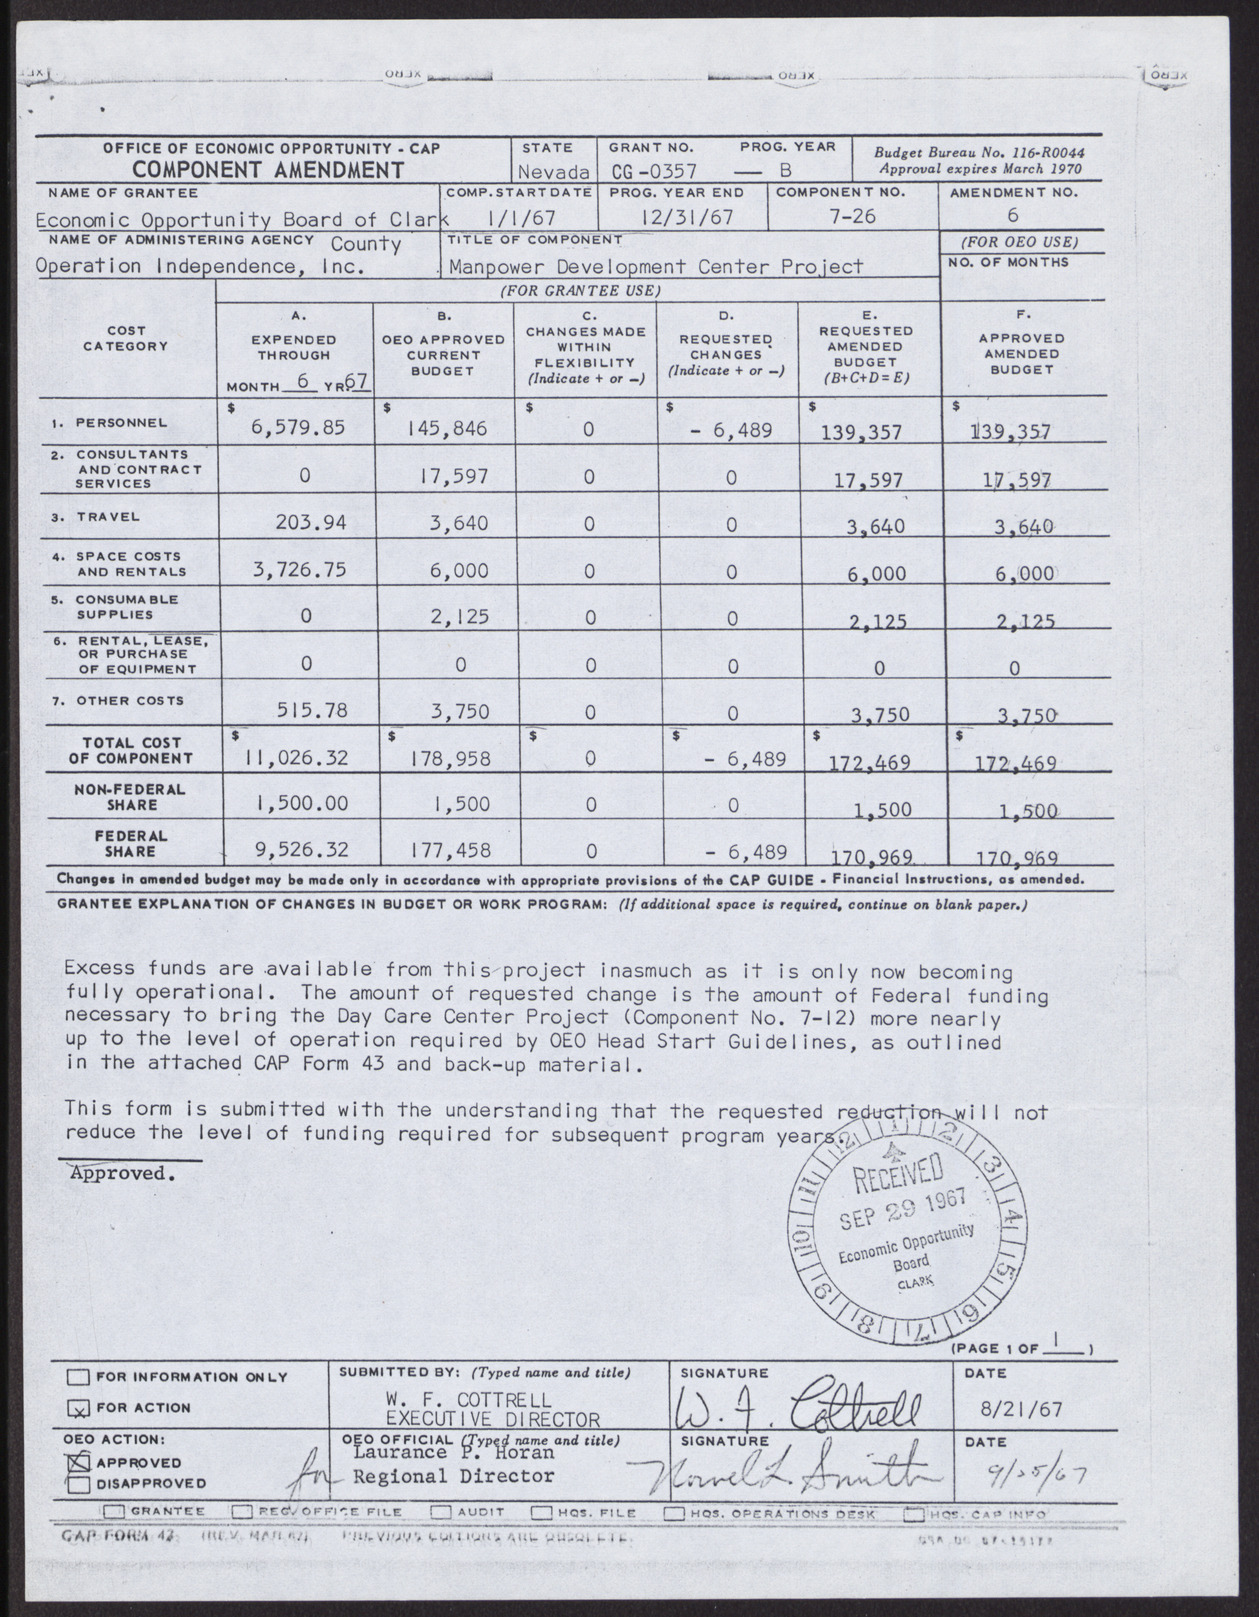 Copy of approved CAP form (2 pages), August 4, 1967, page 2